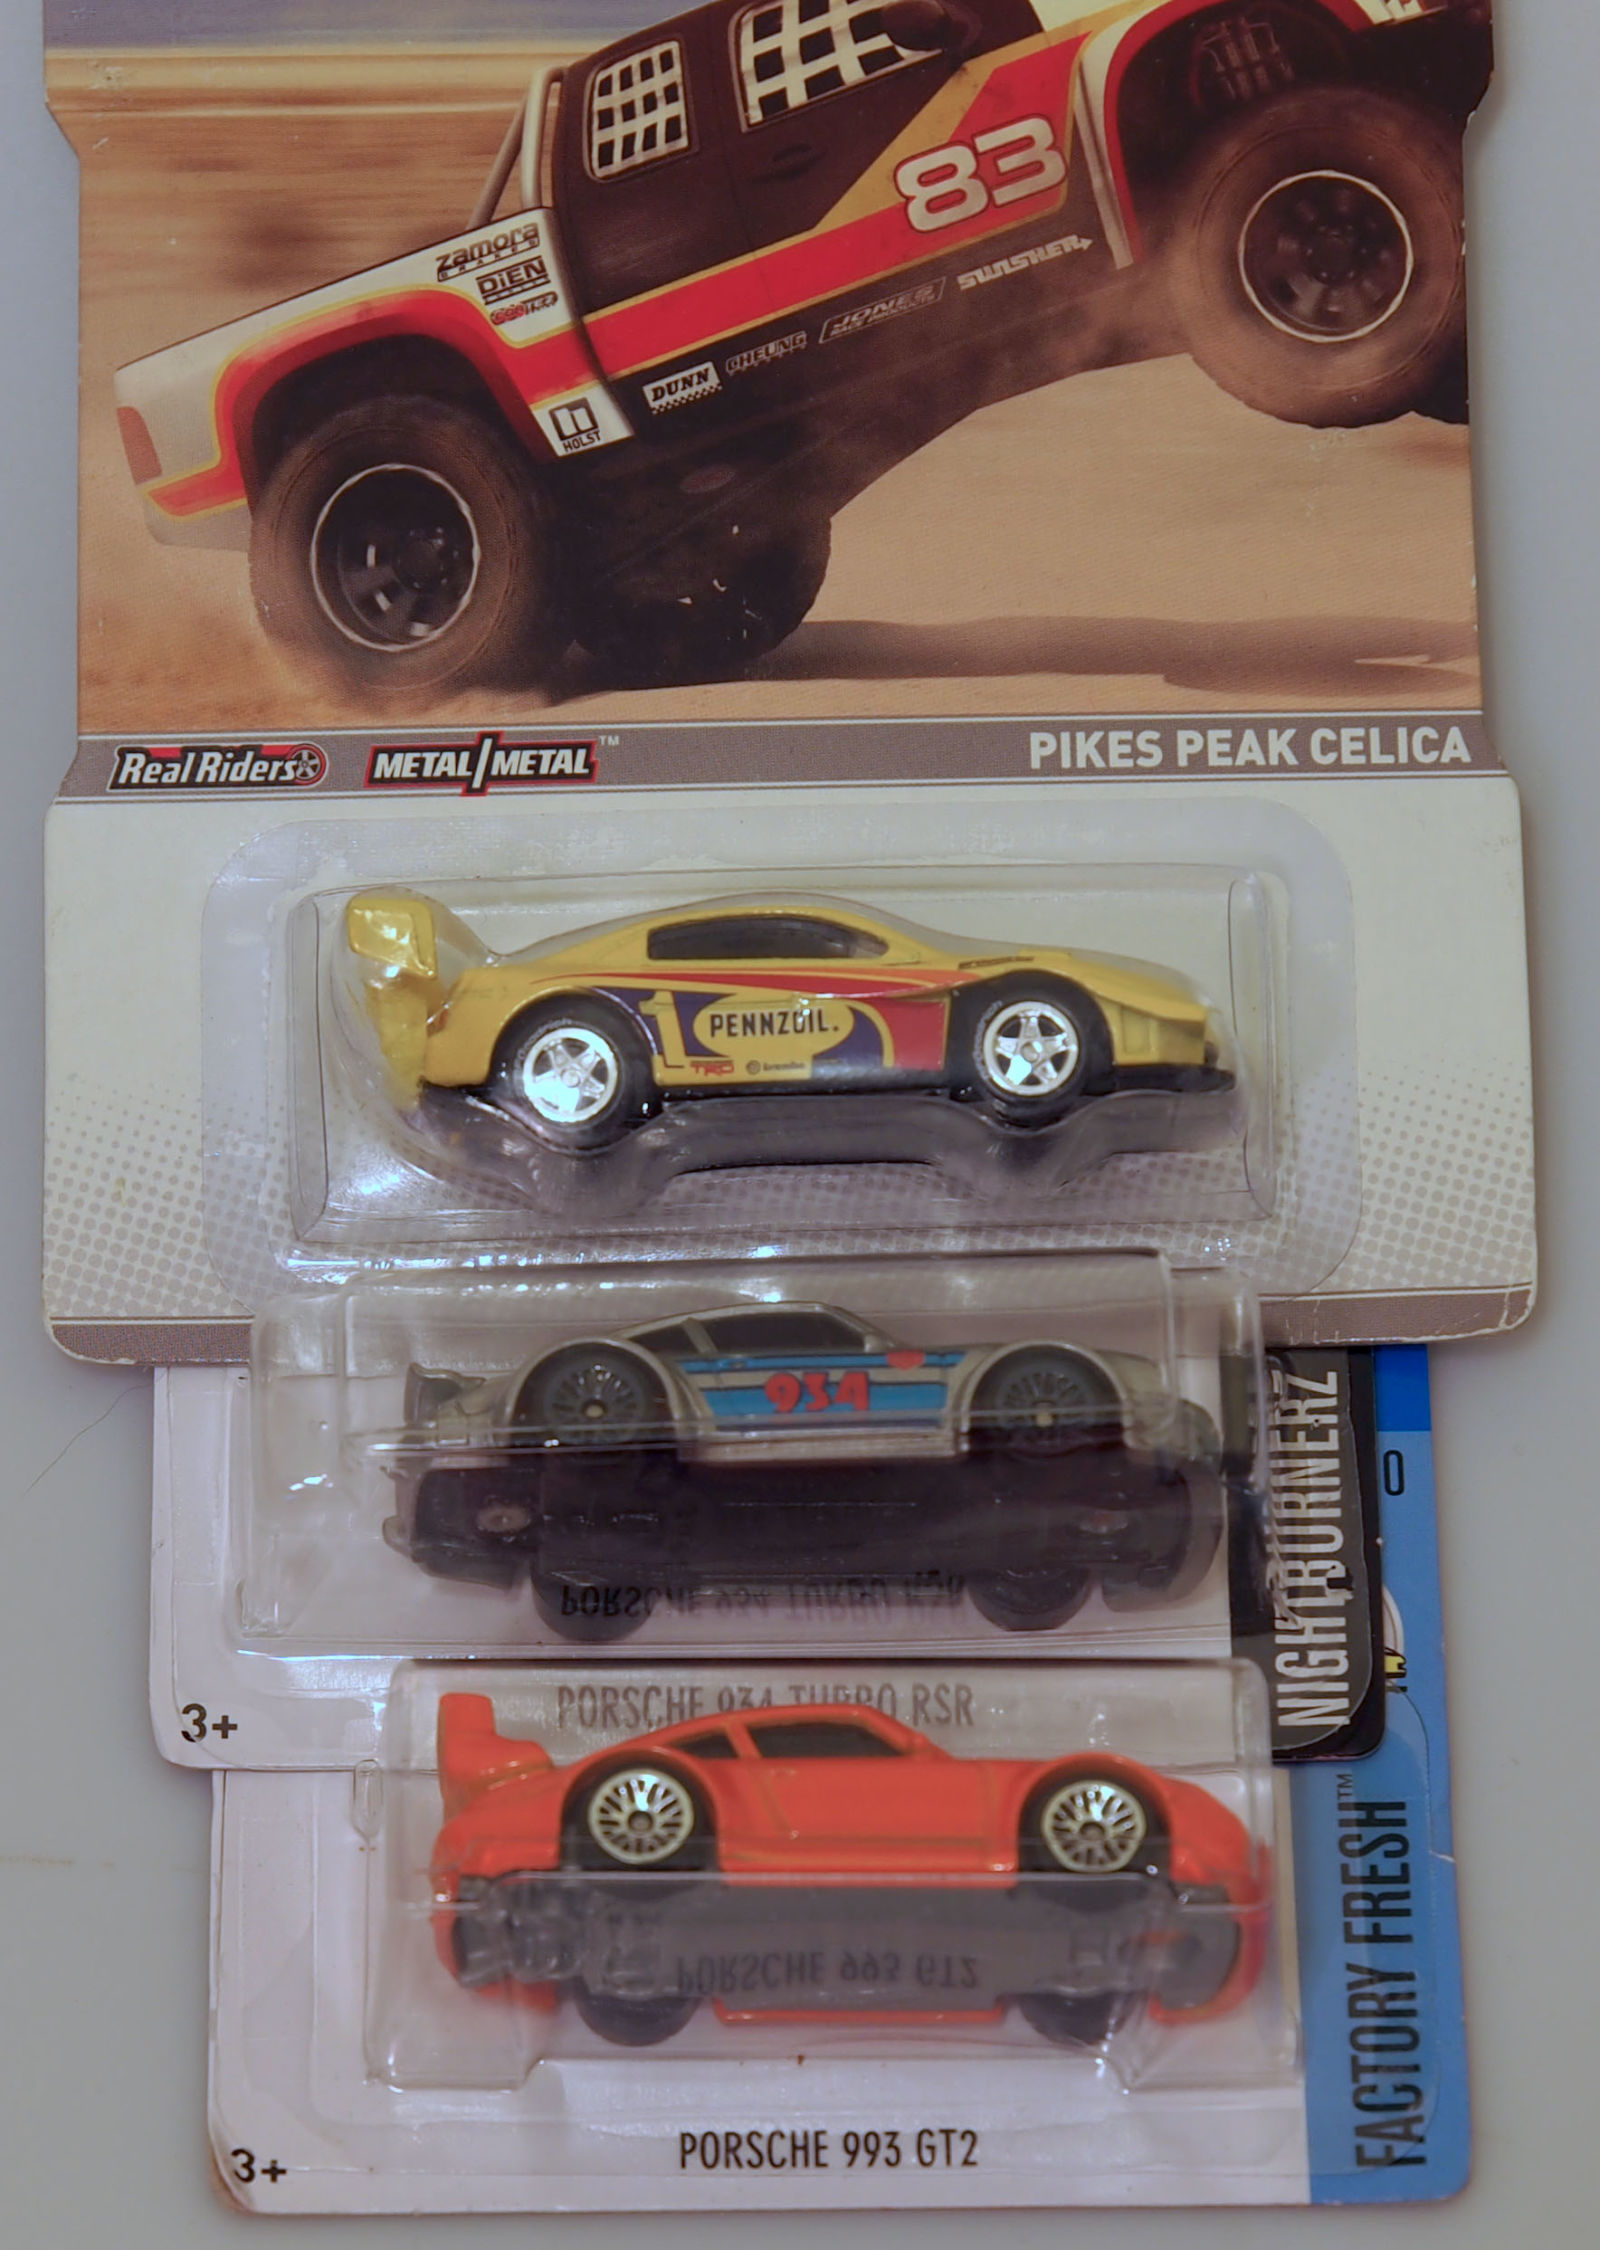 This box was mainly for the Pikes Peak Celica, but porsches are always welcome :D